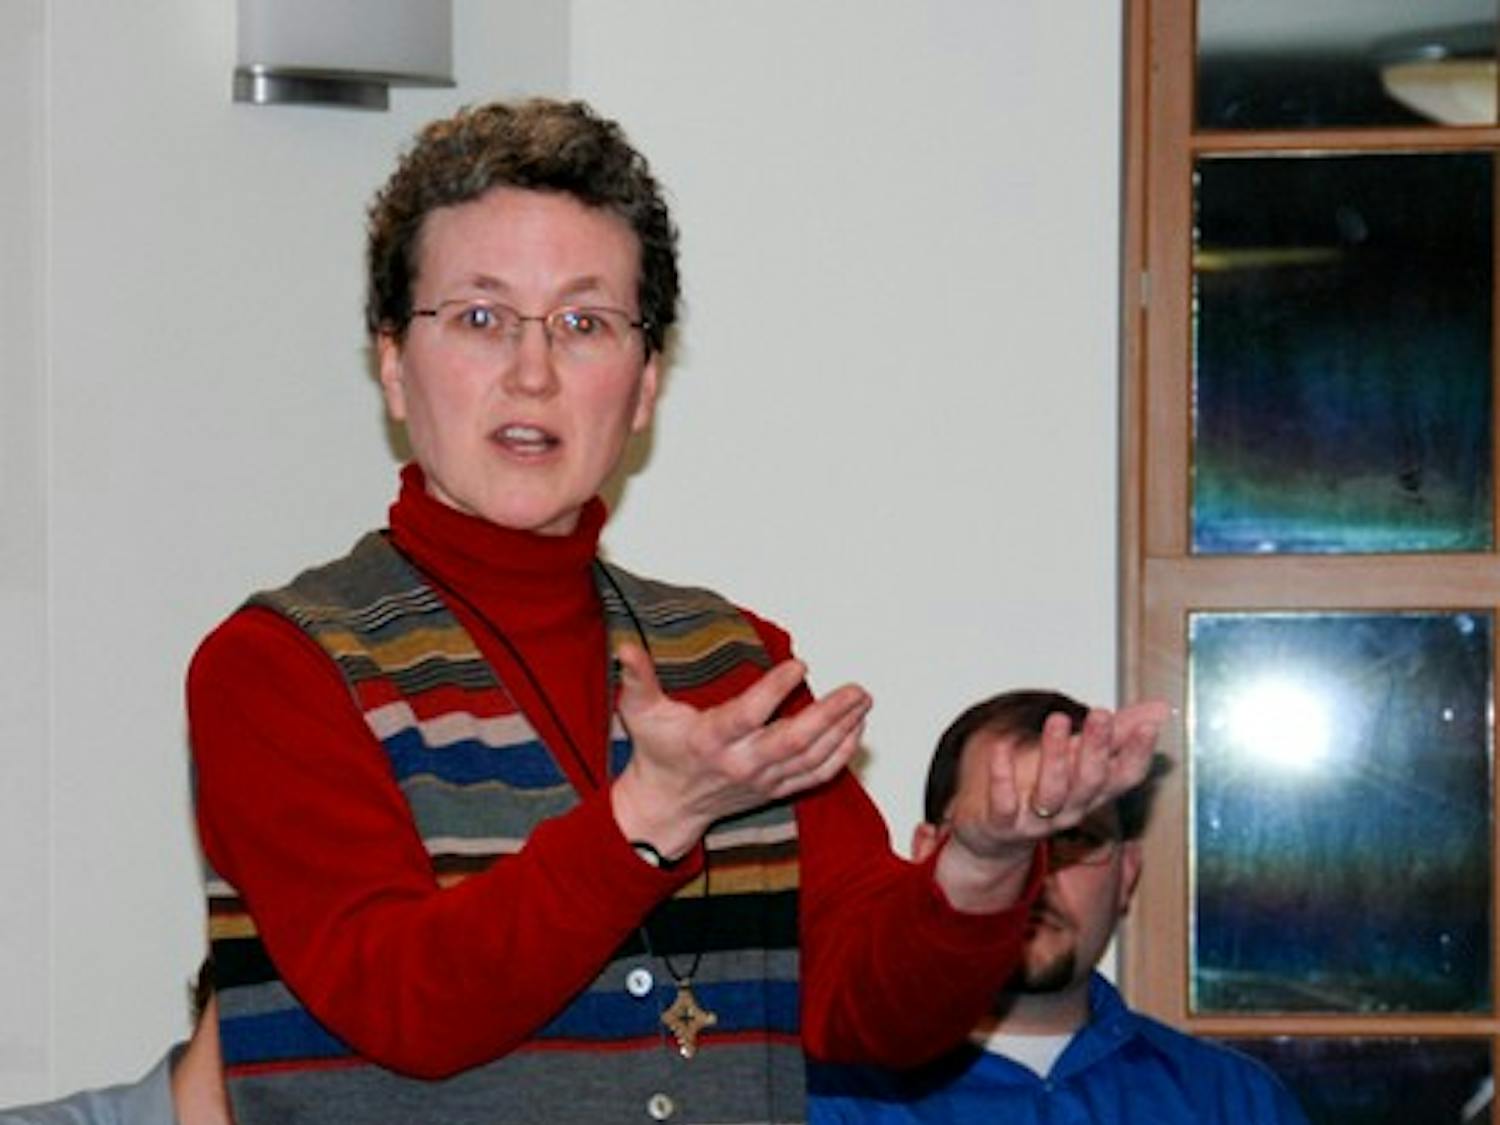 Nancy Vogel, a reverend at Saint Paul's Episcopal Church in White River Junction, Vt., spoke about religion and sexuality at a panel discussion Tuesday.